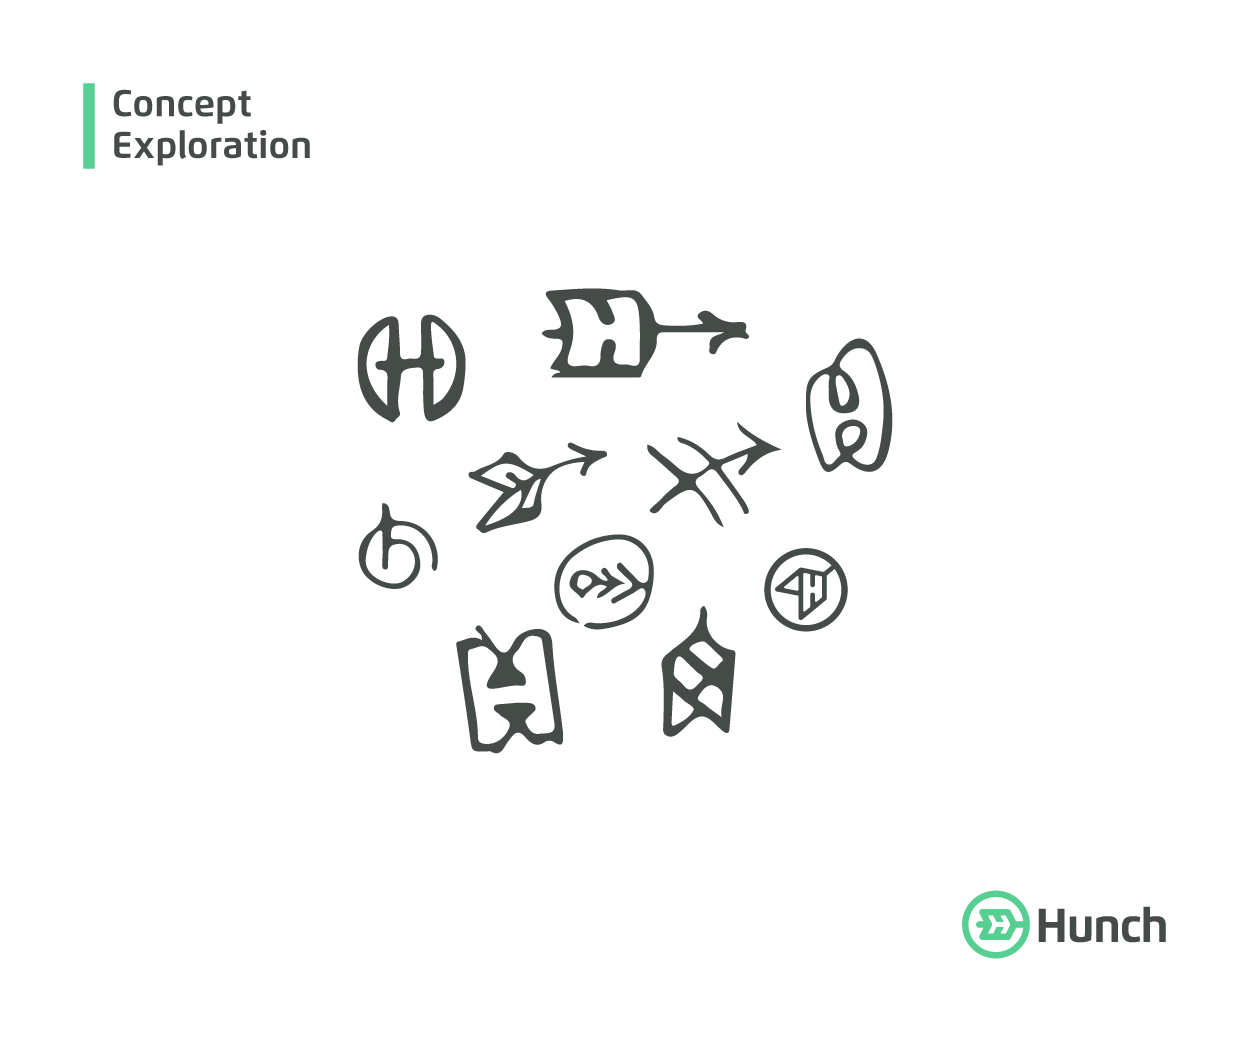 Hunch an automated creative production and media buying platform Symbol Exploration Image